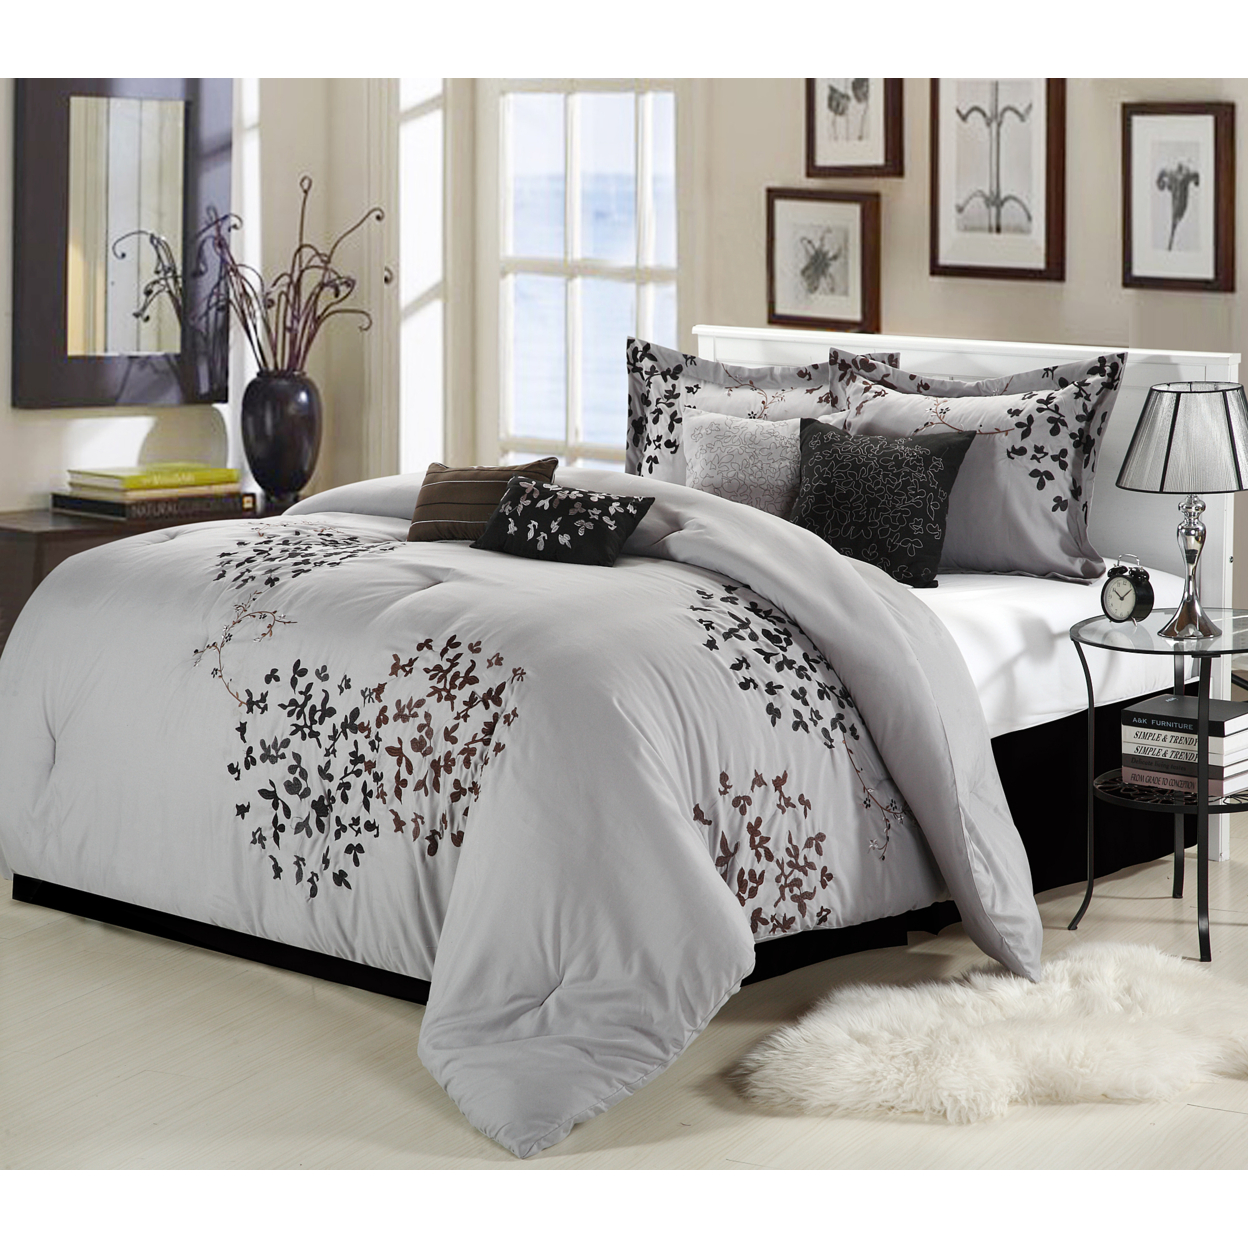 Cheila 8-Piece Embroidered Comforter Set - Silver, Queen